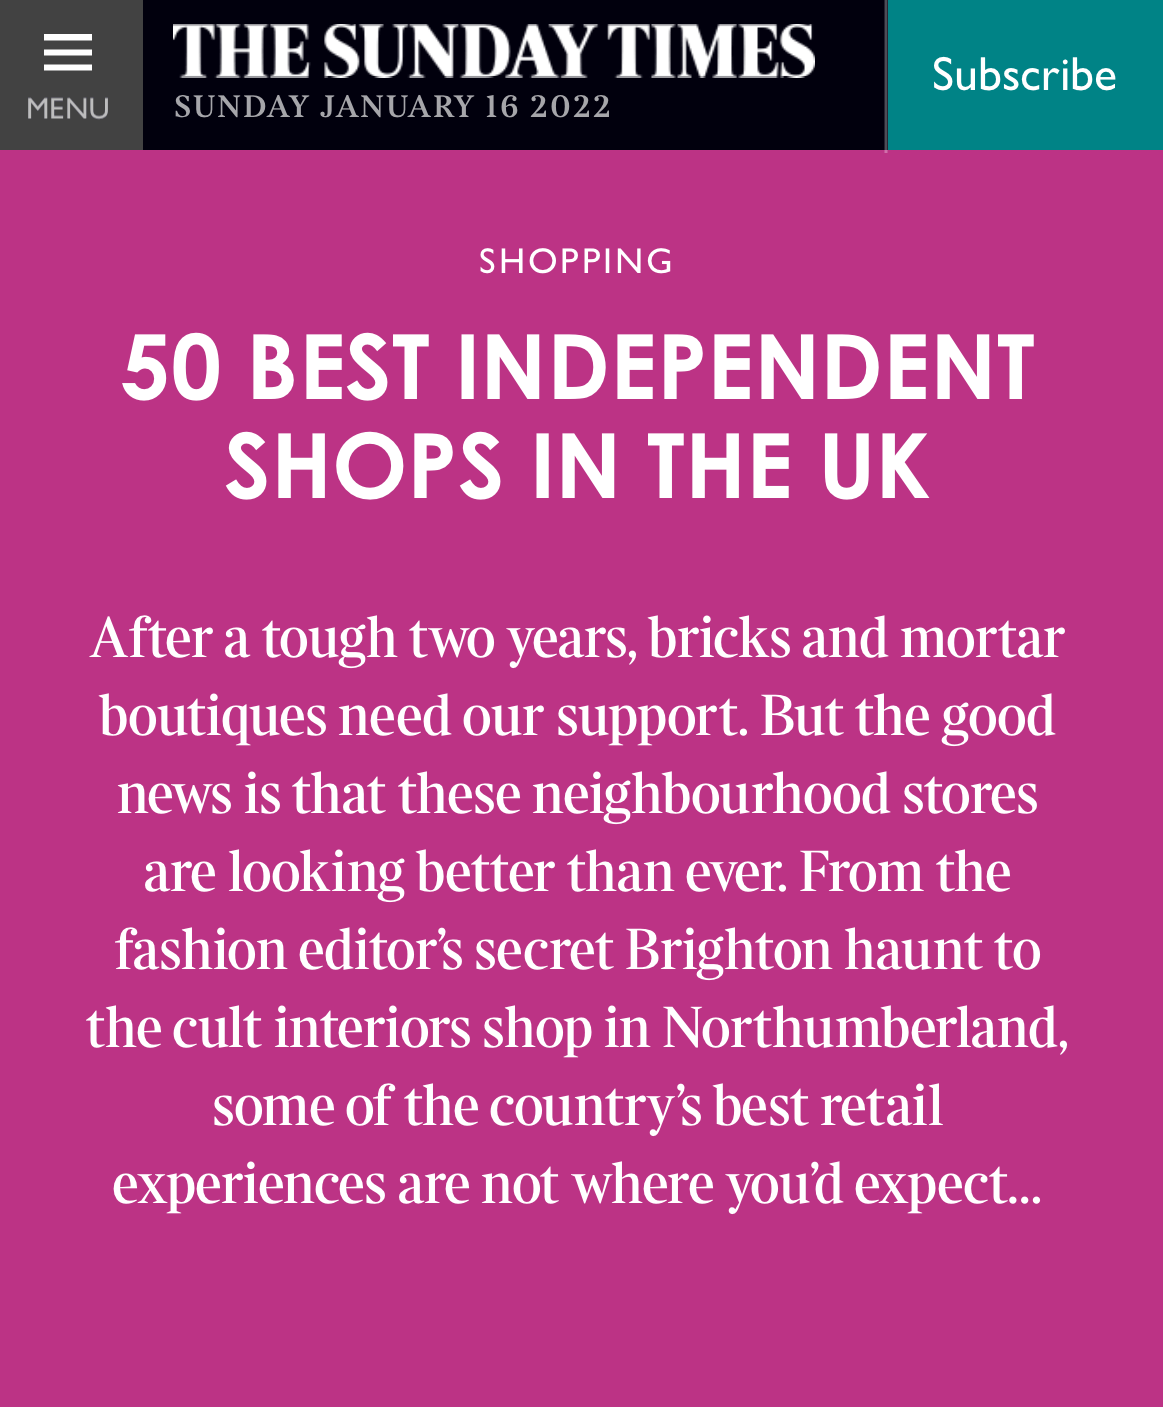 prior shop featured in the sunday times 50 best independent shops in the UK. Image is a screen shot of the intro of the article